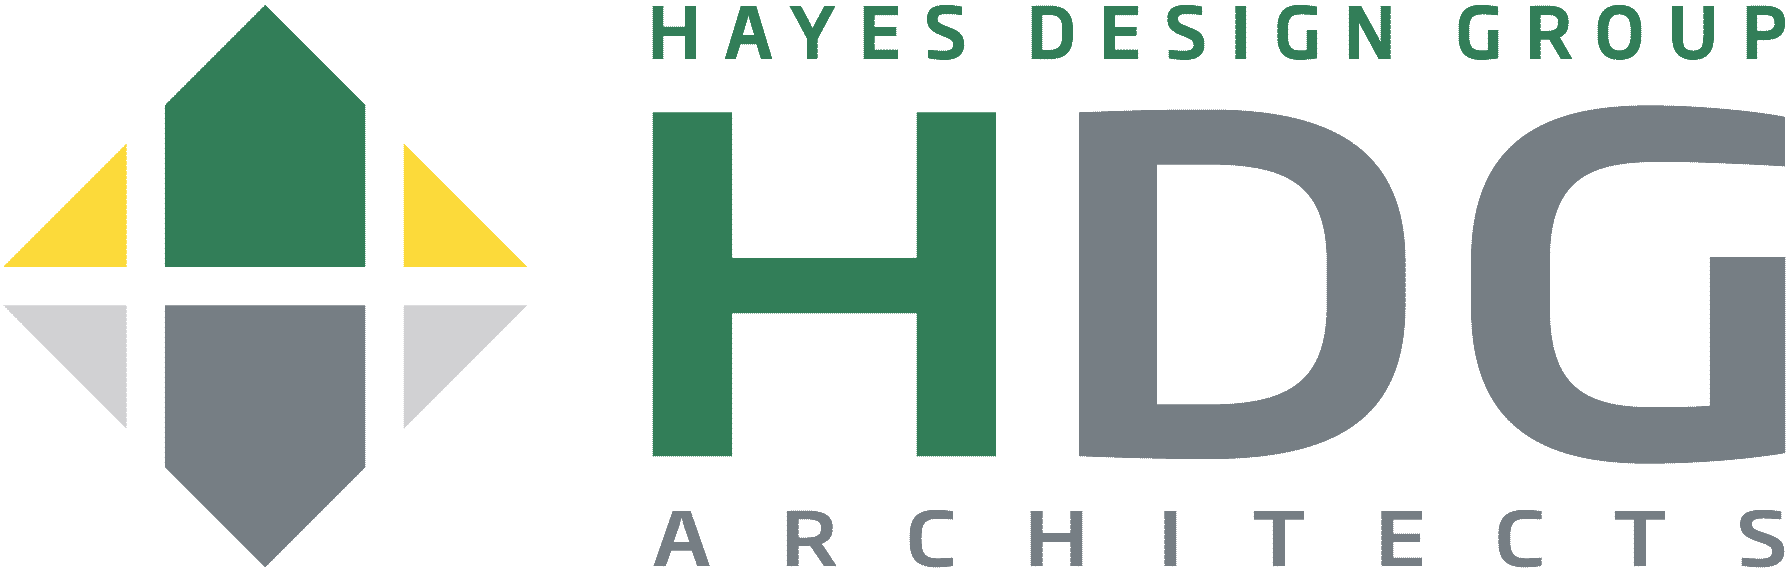 Hayes Logo - Home – Hayes Design Group Architects Pittsburgh PA